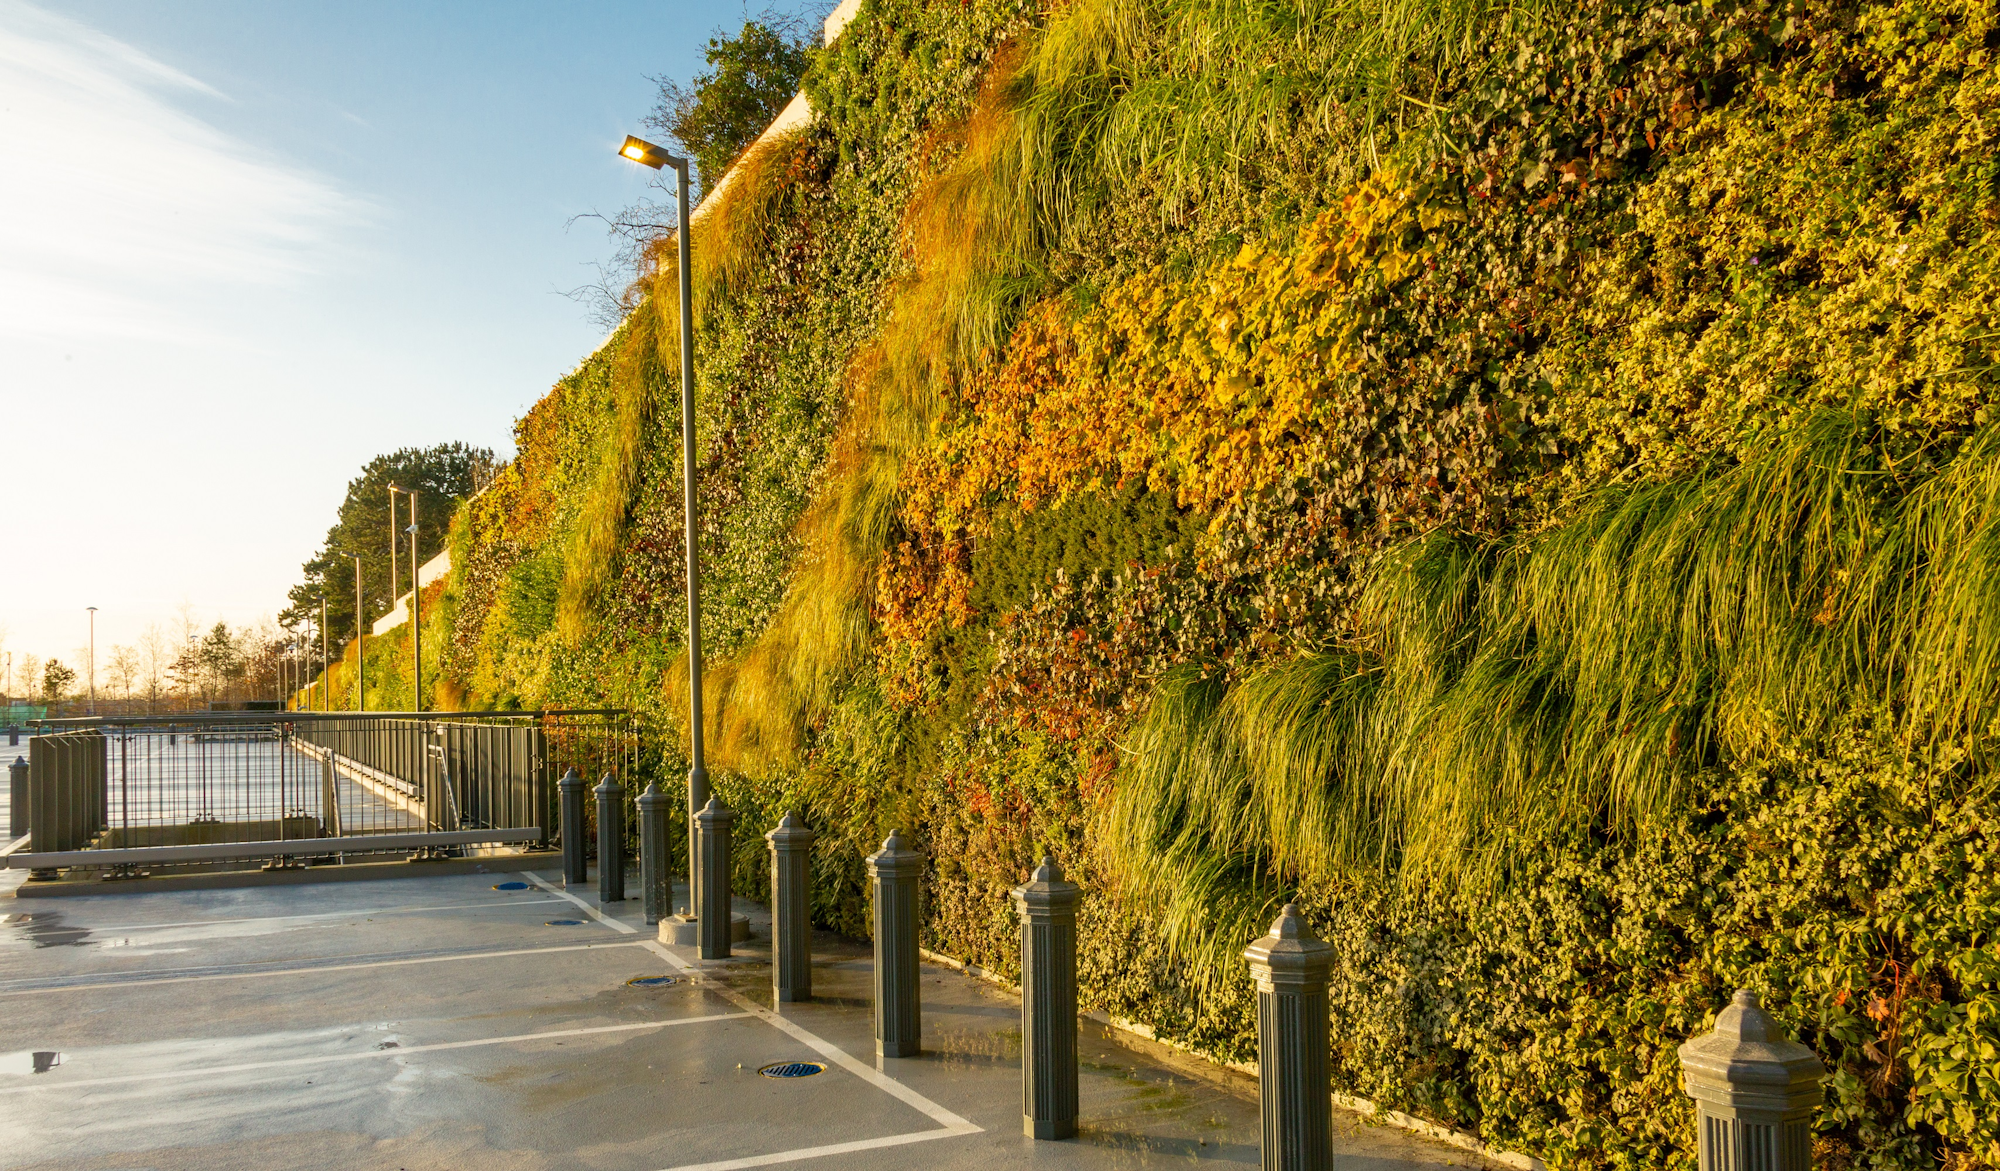 evergreen living wall stretching into the distance at a car park in ireland